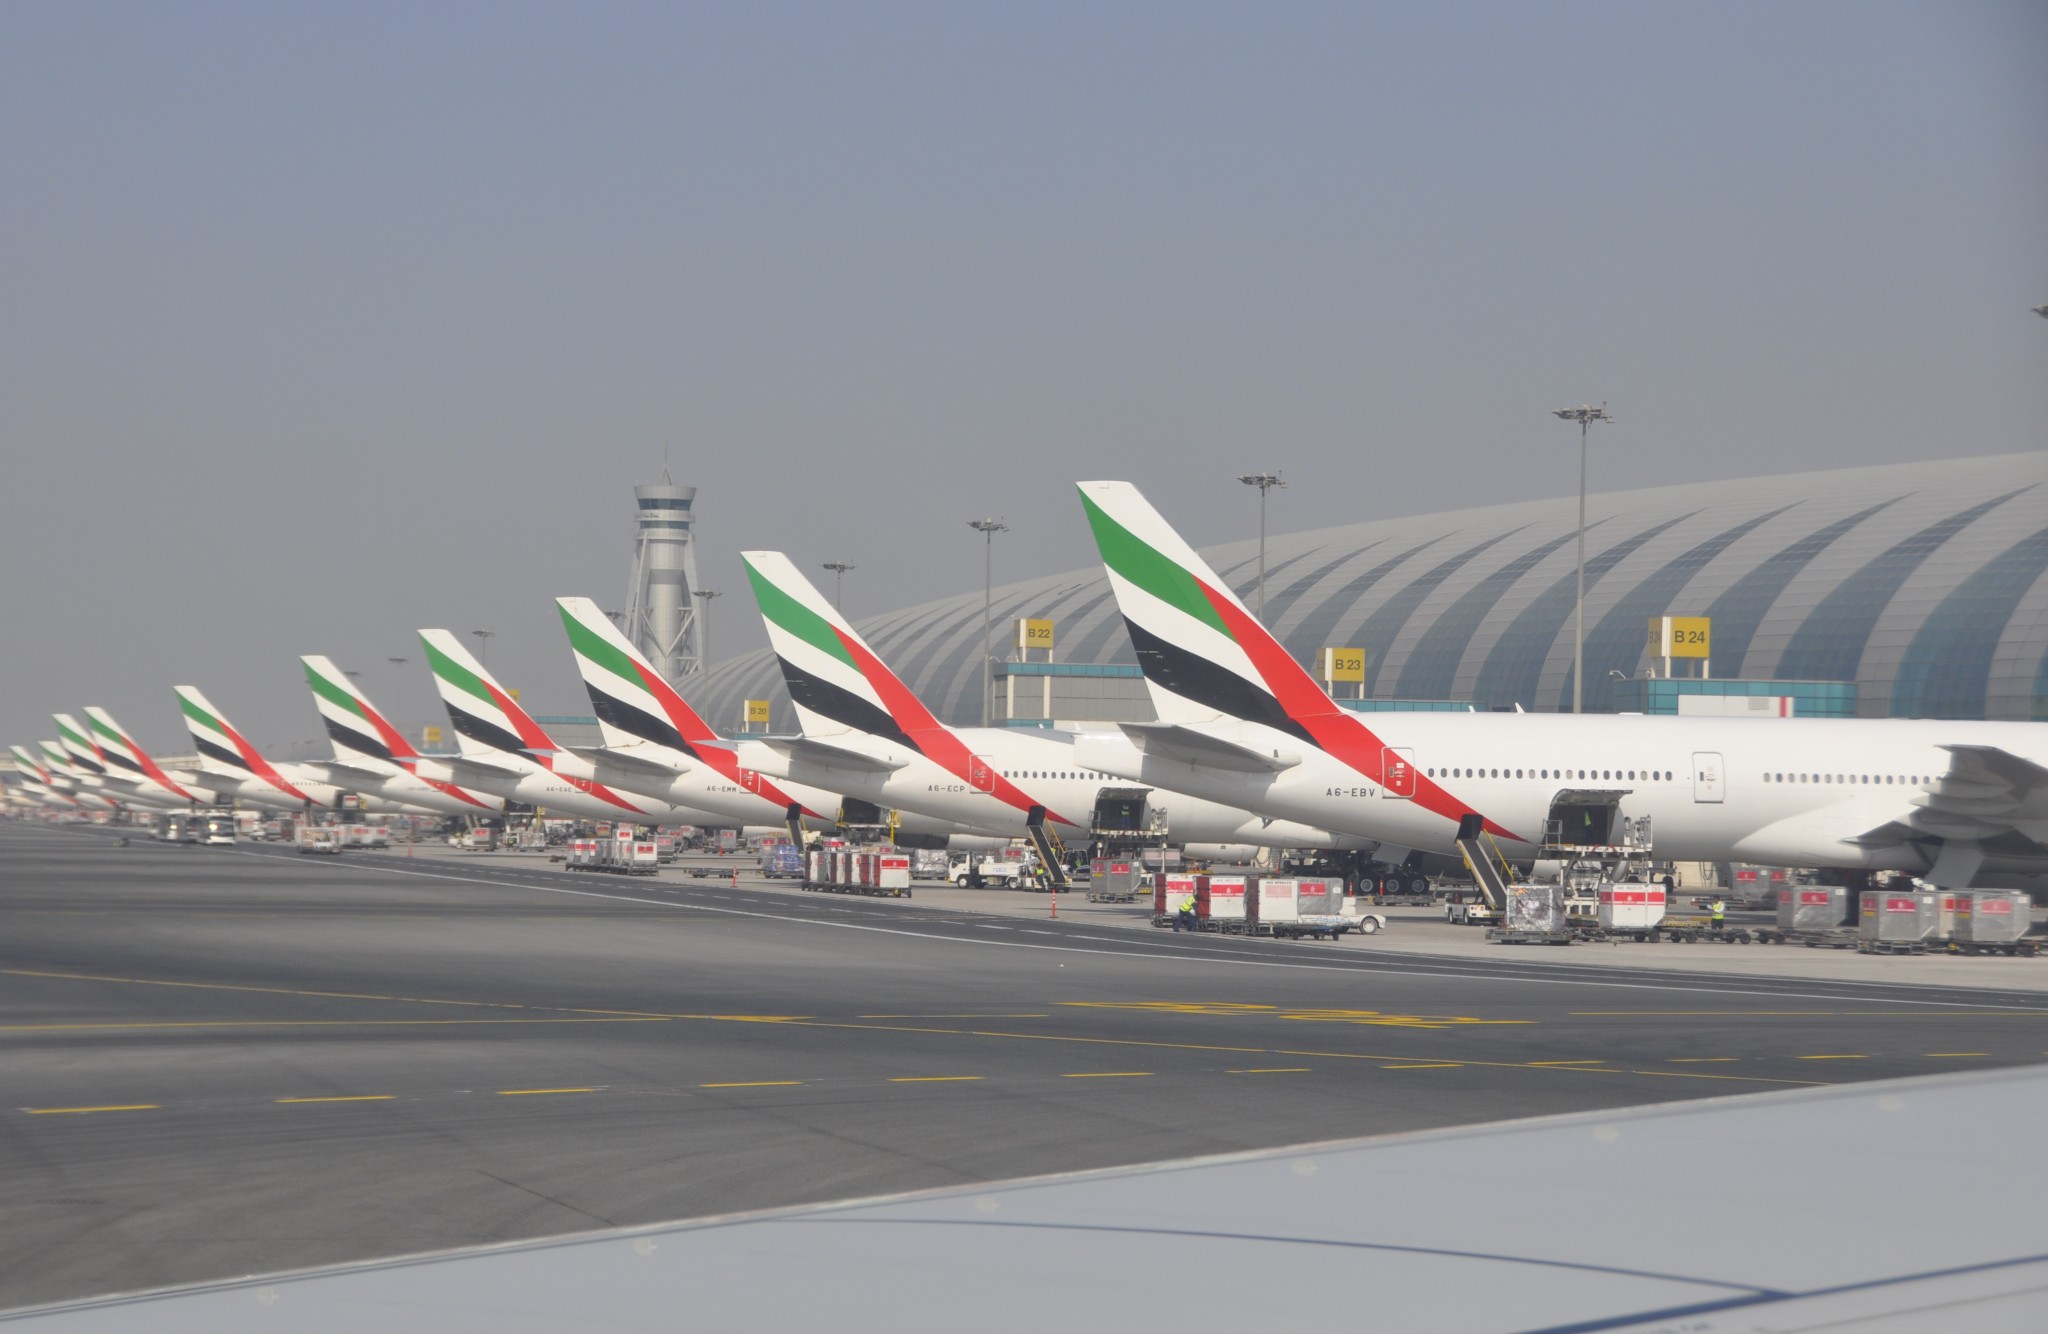 DXB doubles its annual passenger traffic in 2022 with 66.1 million passengers